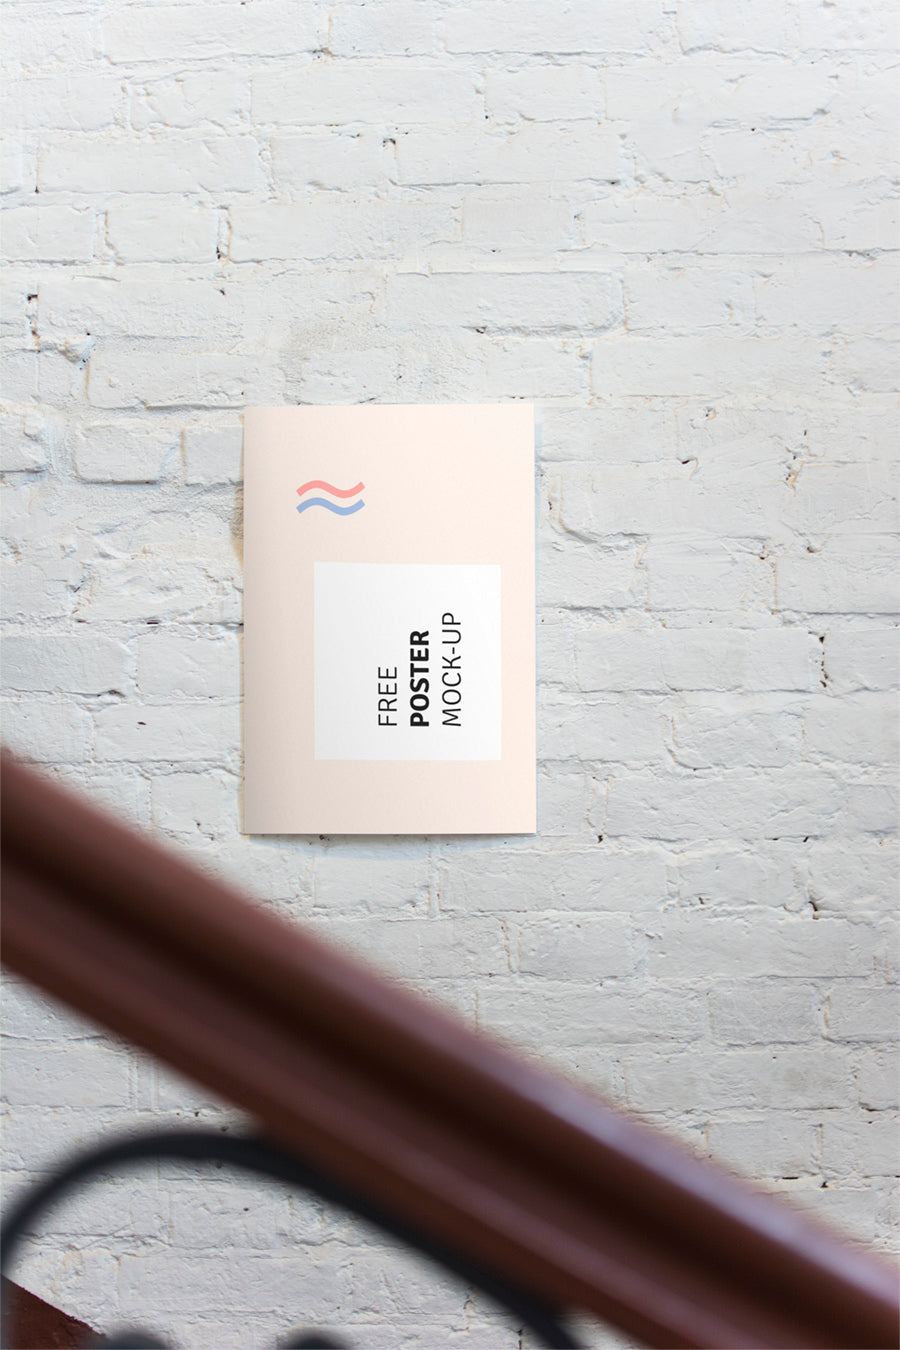 Free Startup Business Office Poster or Flyer in a Brick Wall Mockup